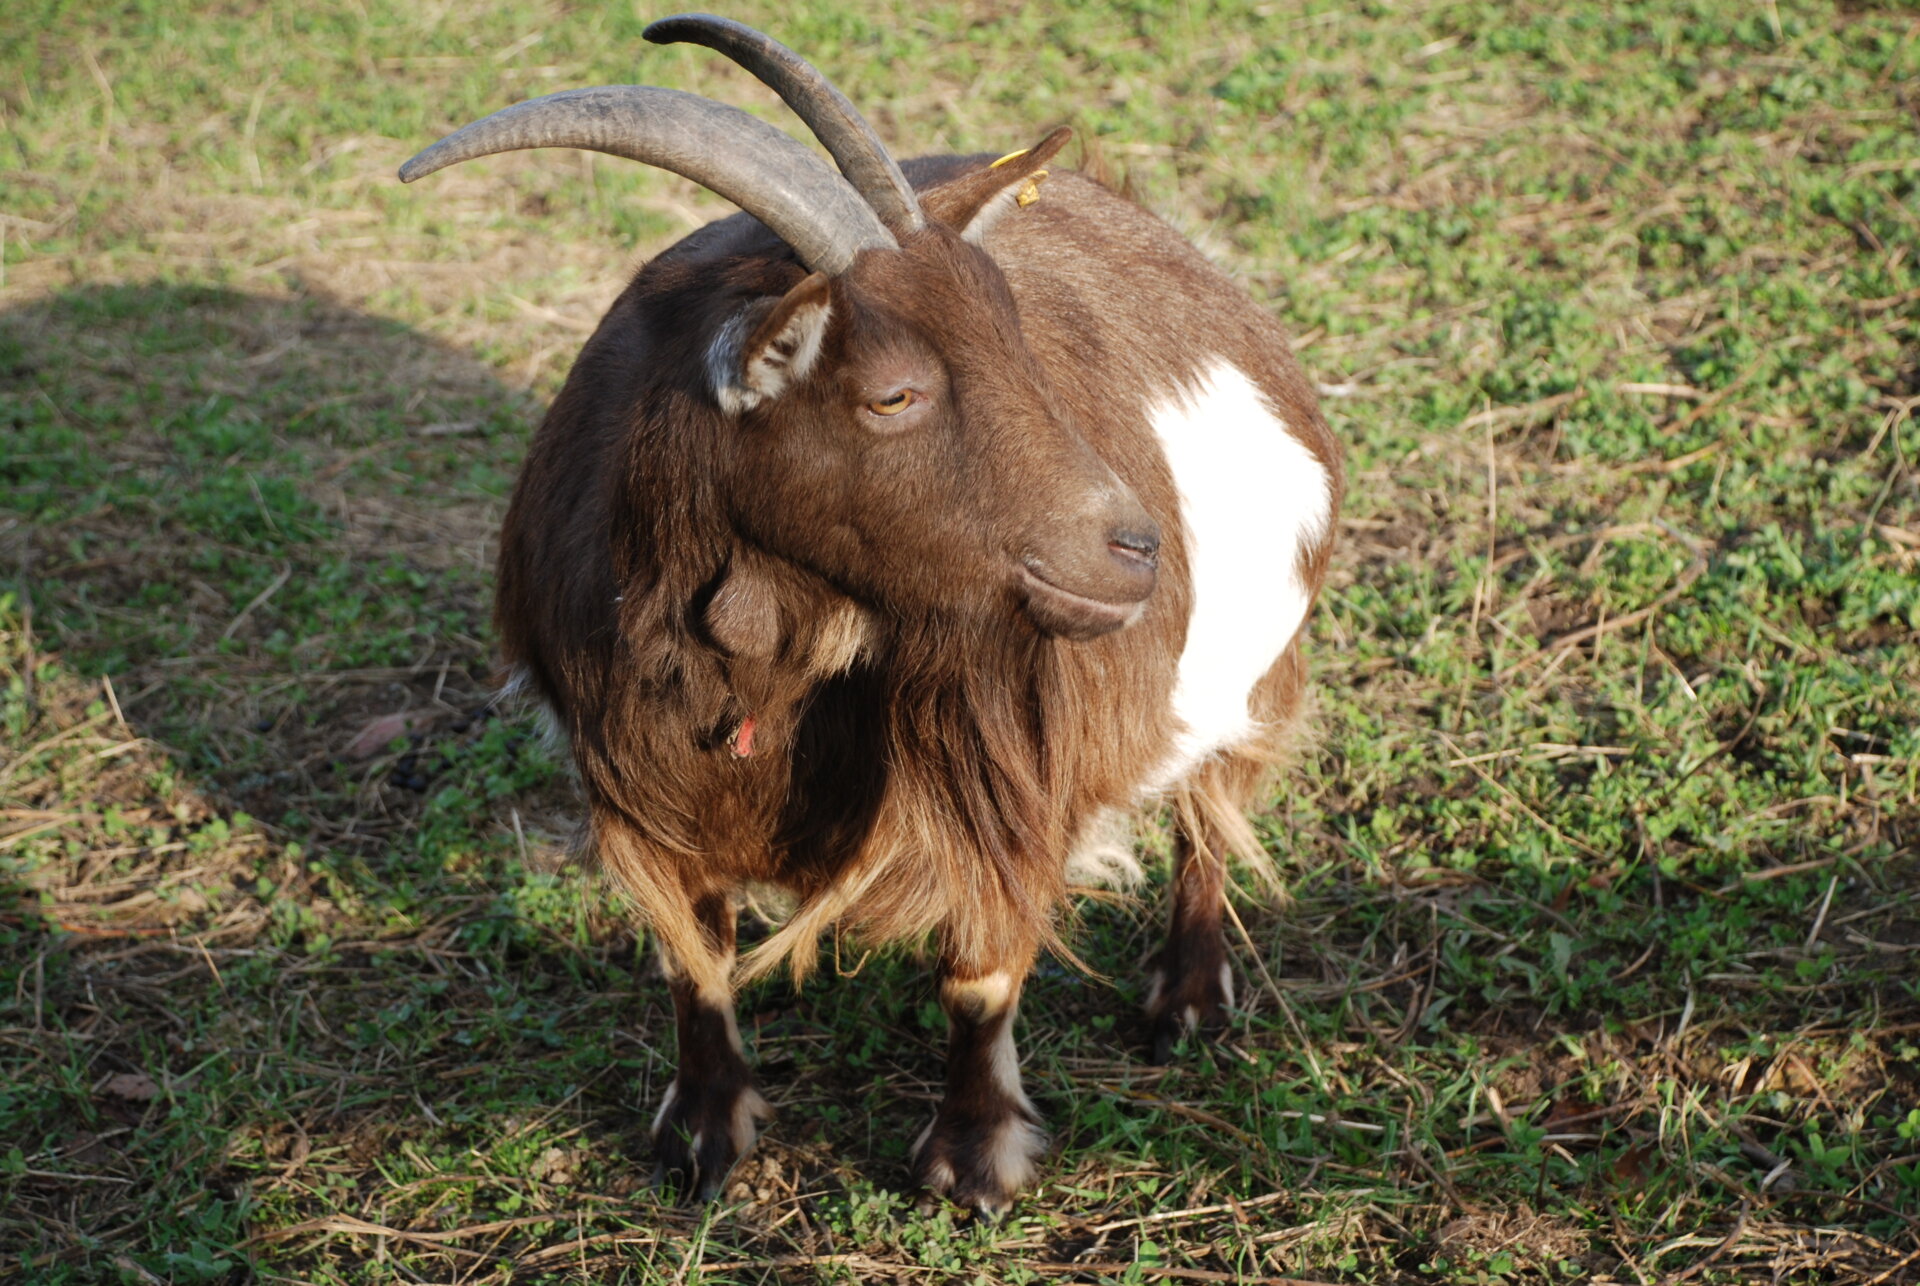 Goat at Heeley City Farm by Philippa Willitts